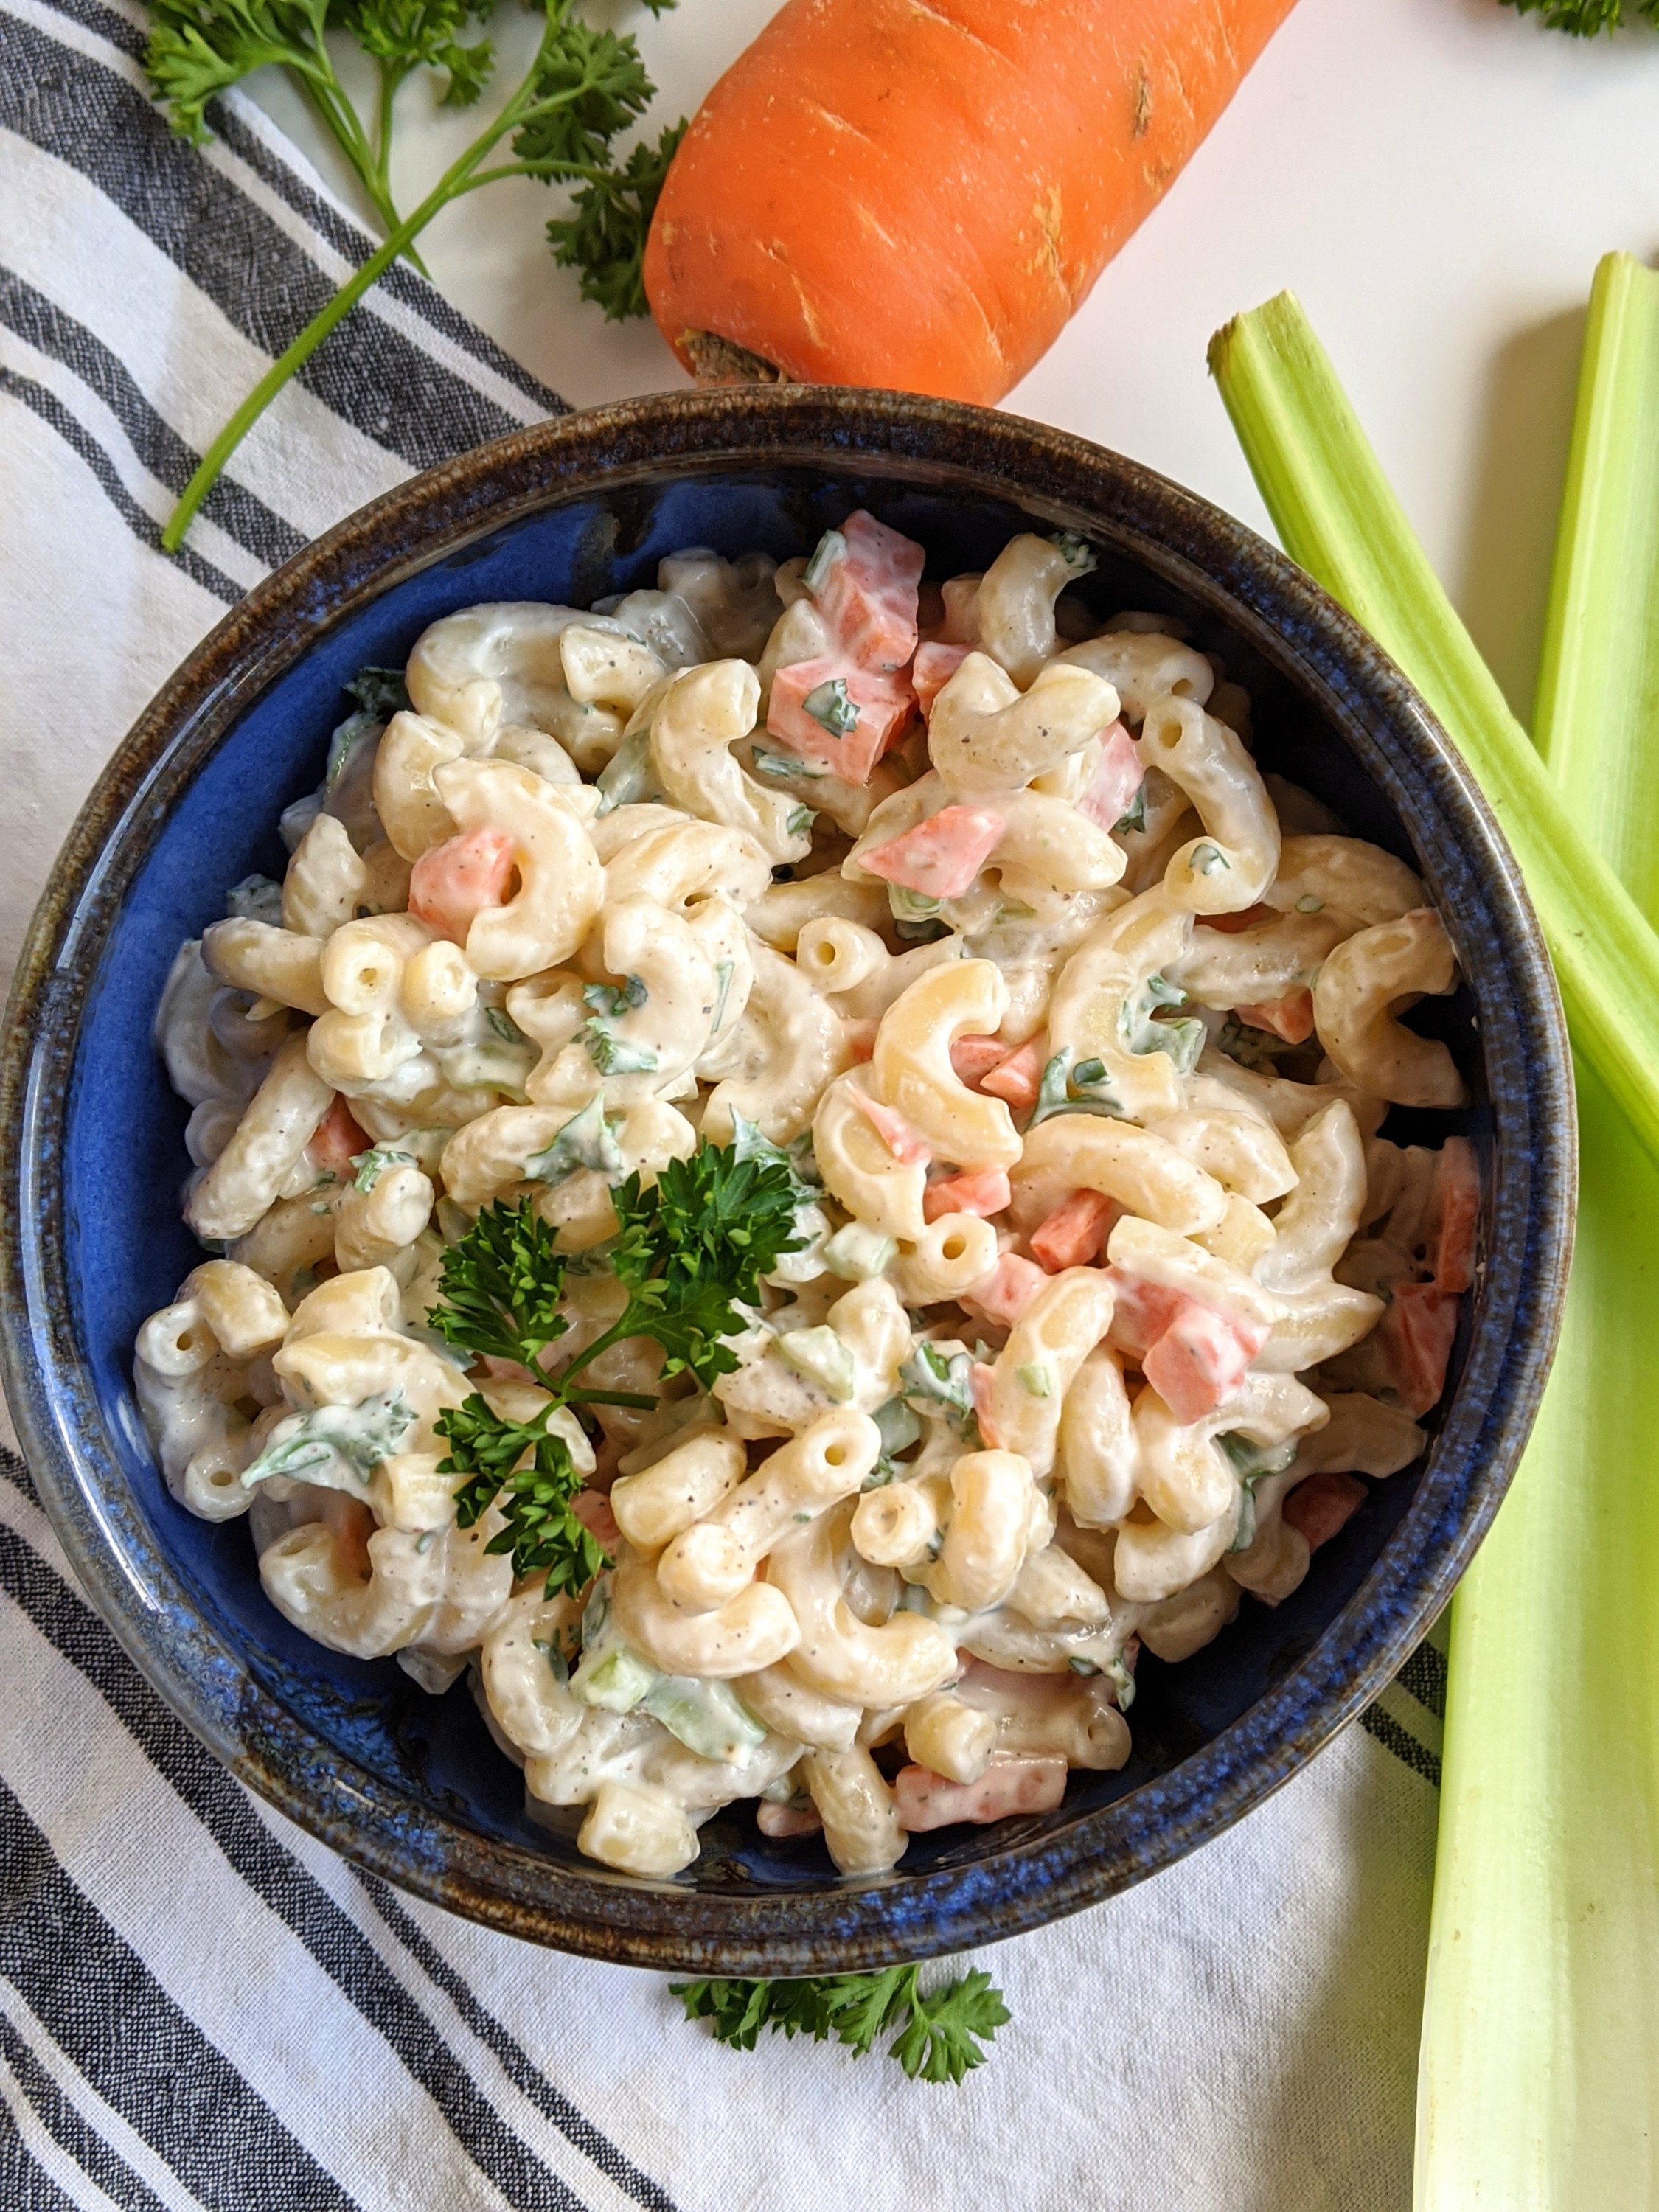 macaroni salad with greek yogurt high protein low fat with carrots celery and parsley